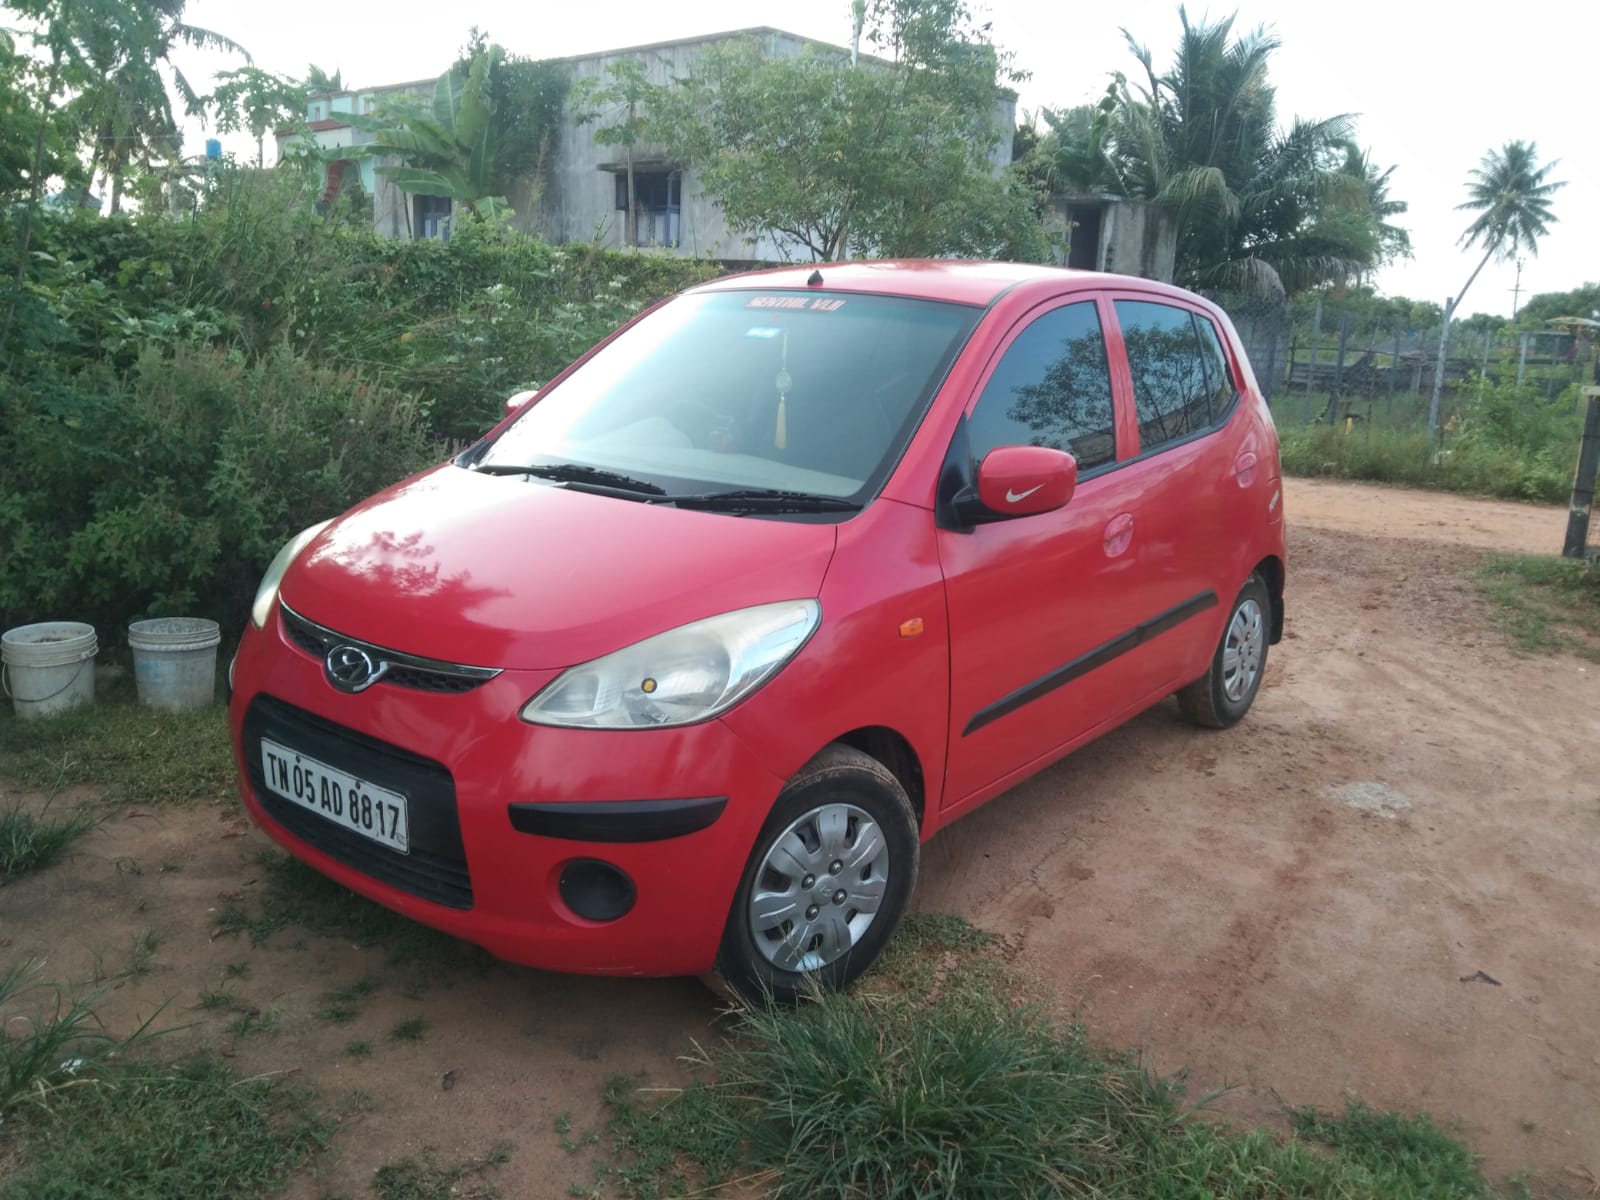 4543-for-sale-Hyundai-i10-Petrol-Fourth-Owner-2010-TN-registered-rs-152000